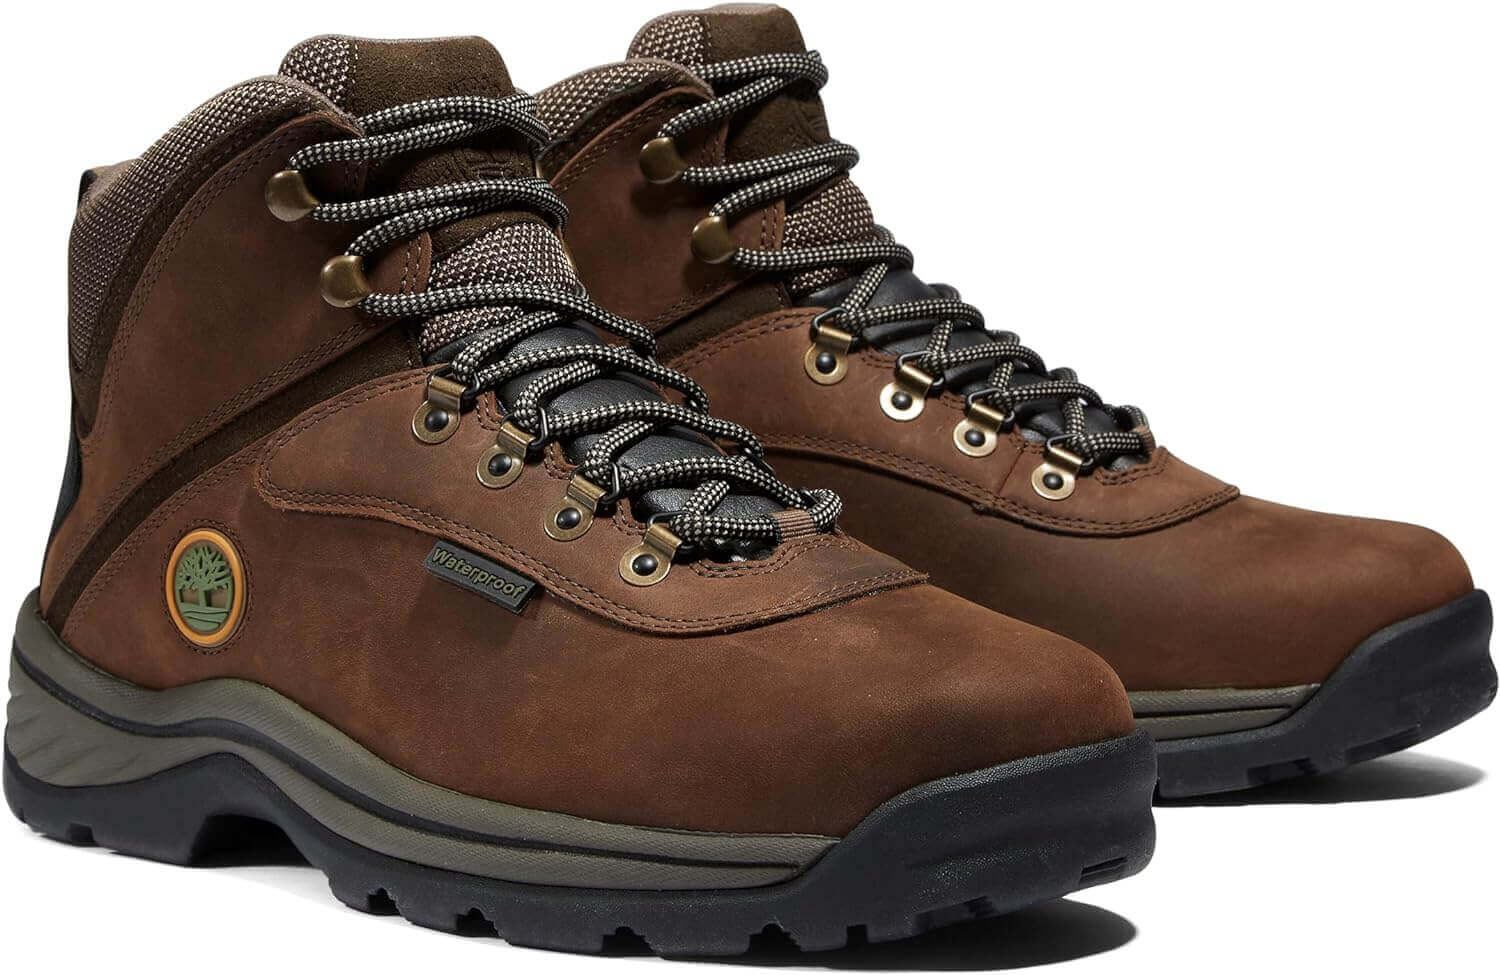 Shop The Latest >Men's White Ledge Mid Waterproof Hiking Boot > *Only $121.43*> From The Top Brand > *Timberlandl* > Shop Now and Get Free Shipping On Orders Over $45.00 >*Shop Earth Foot*